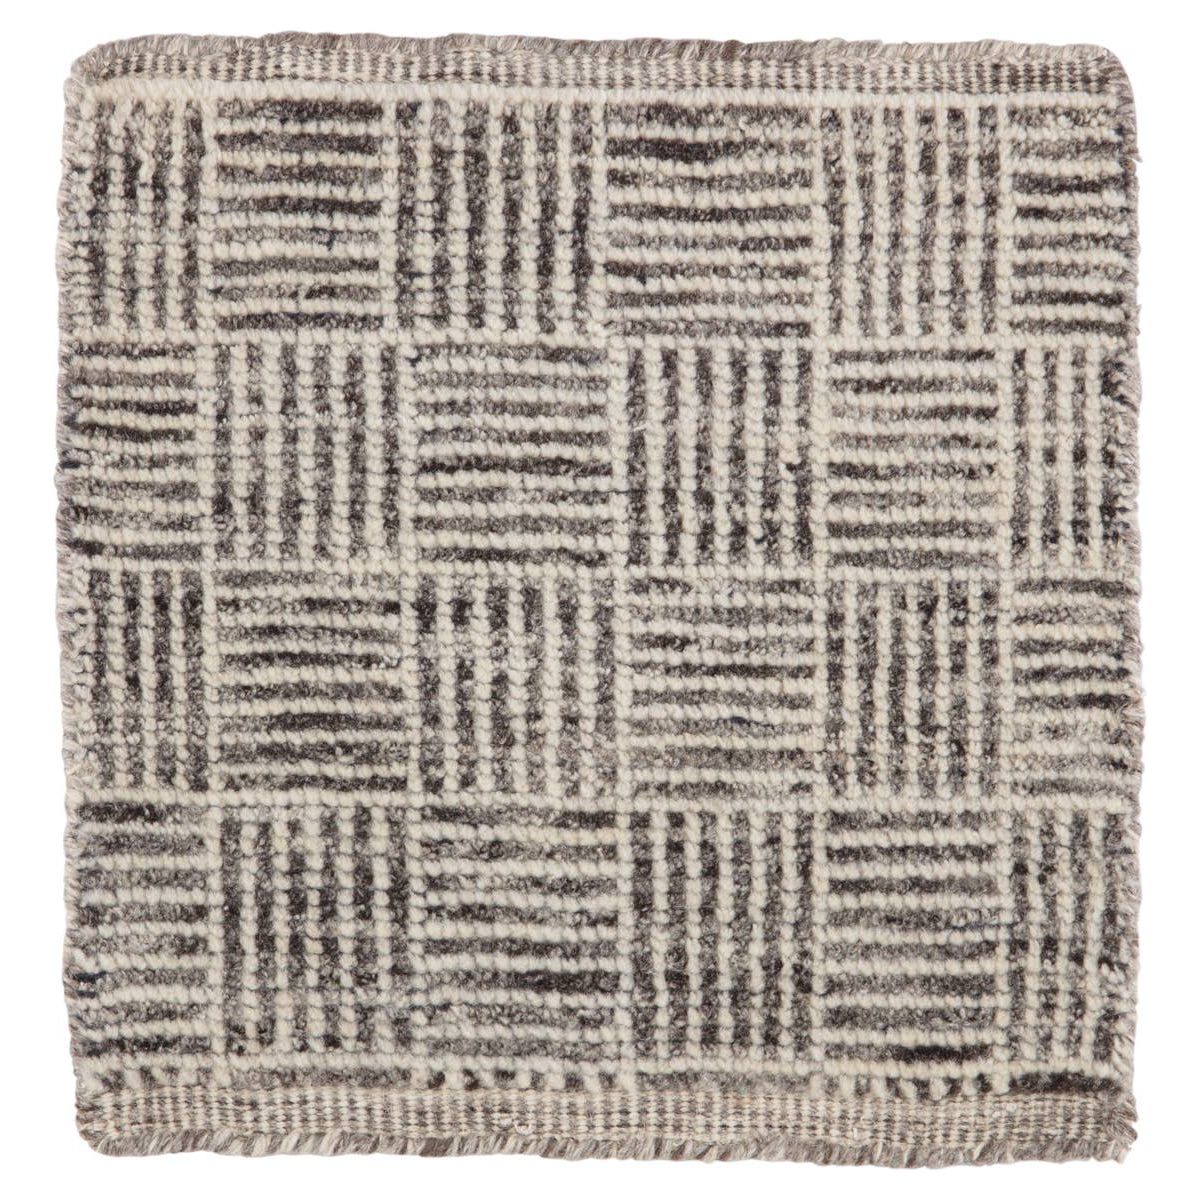 The Rize Mugler Area Rug offers intricate and delicately designed global patterns to the modern home. A thatched square motif creates an eye-catching geometric design on the artistically distressed Mugler area rug. In an earthy ivory and black colorway, this durable hand-knotted wool accent blends a timeless craft with contemporary charm.  Hand Knotted 100% Wool RIZ05